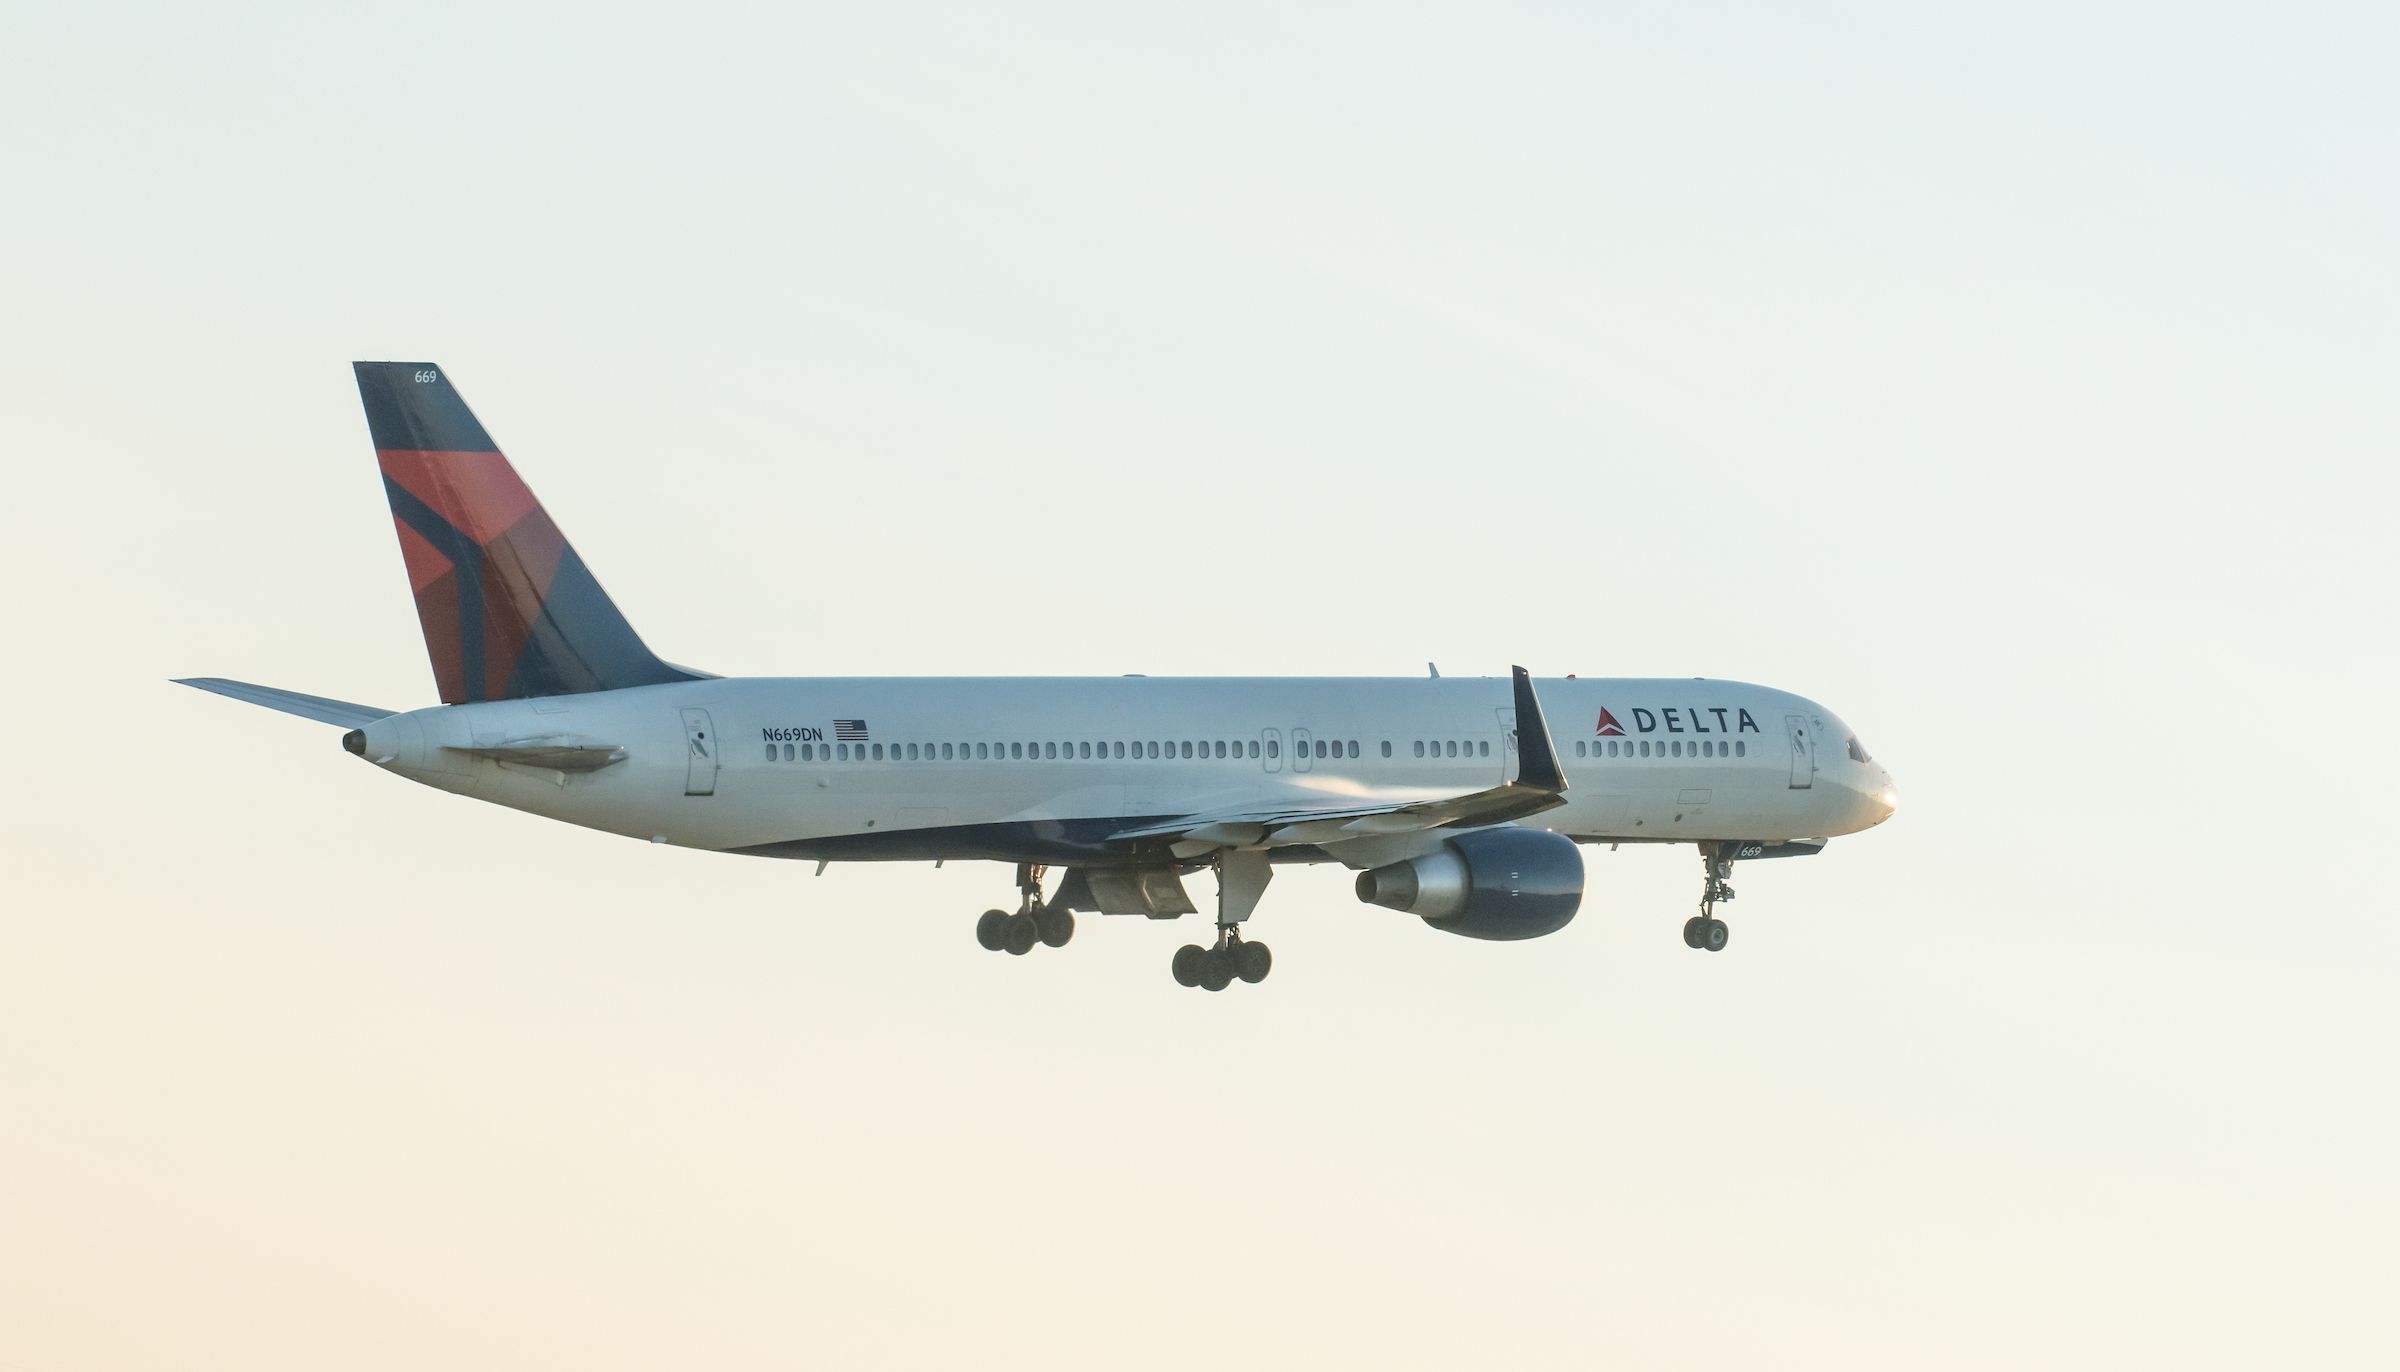 A Delta Air Lines 757 flying in the sky.